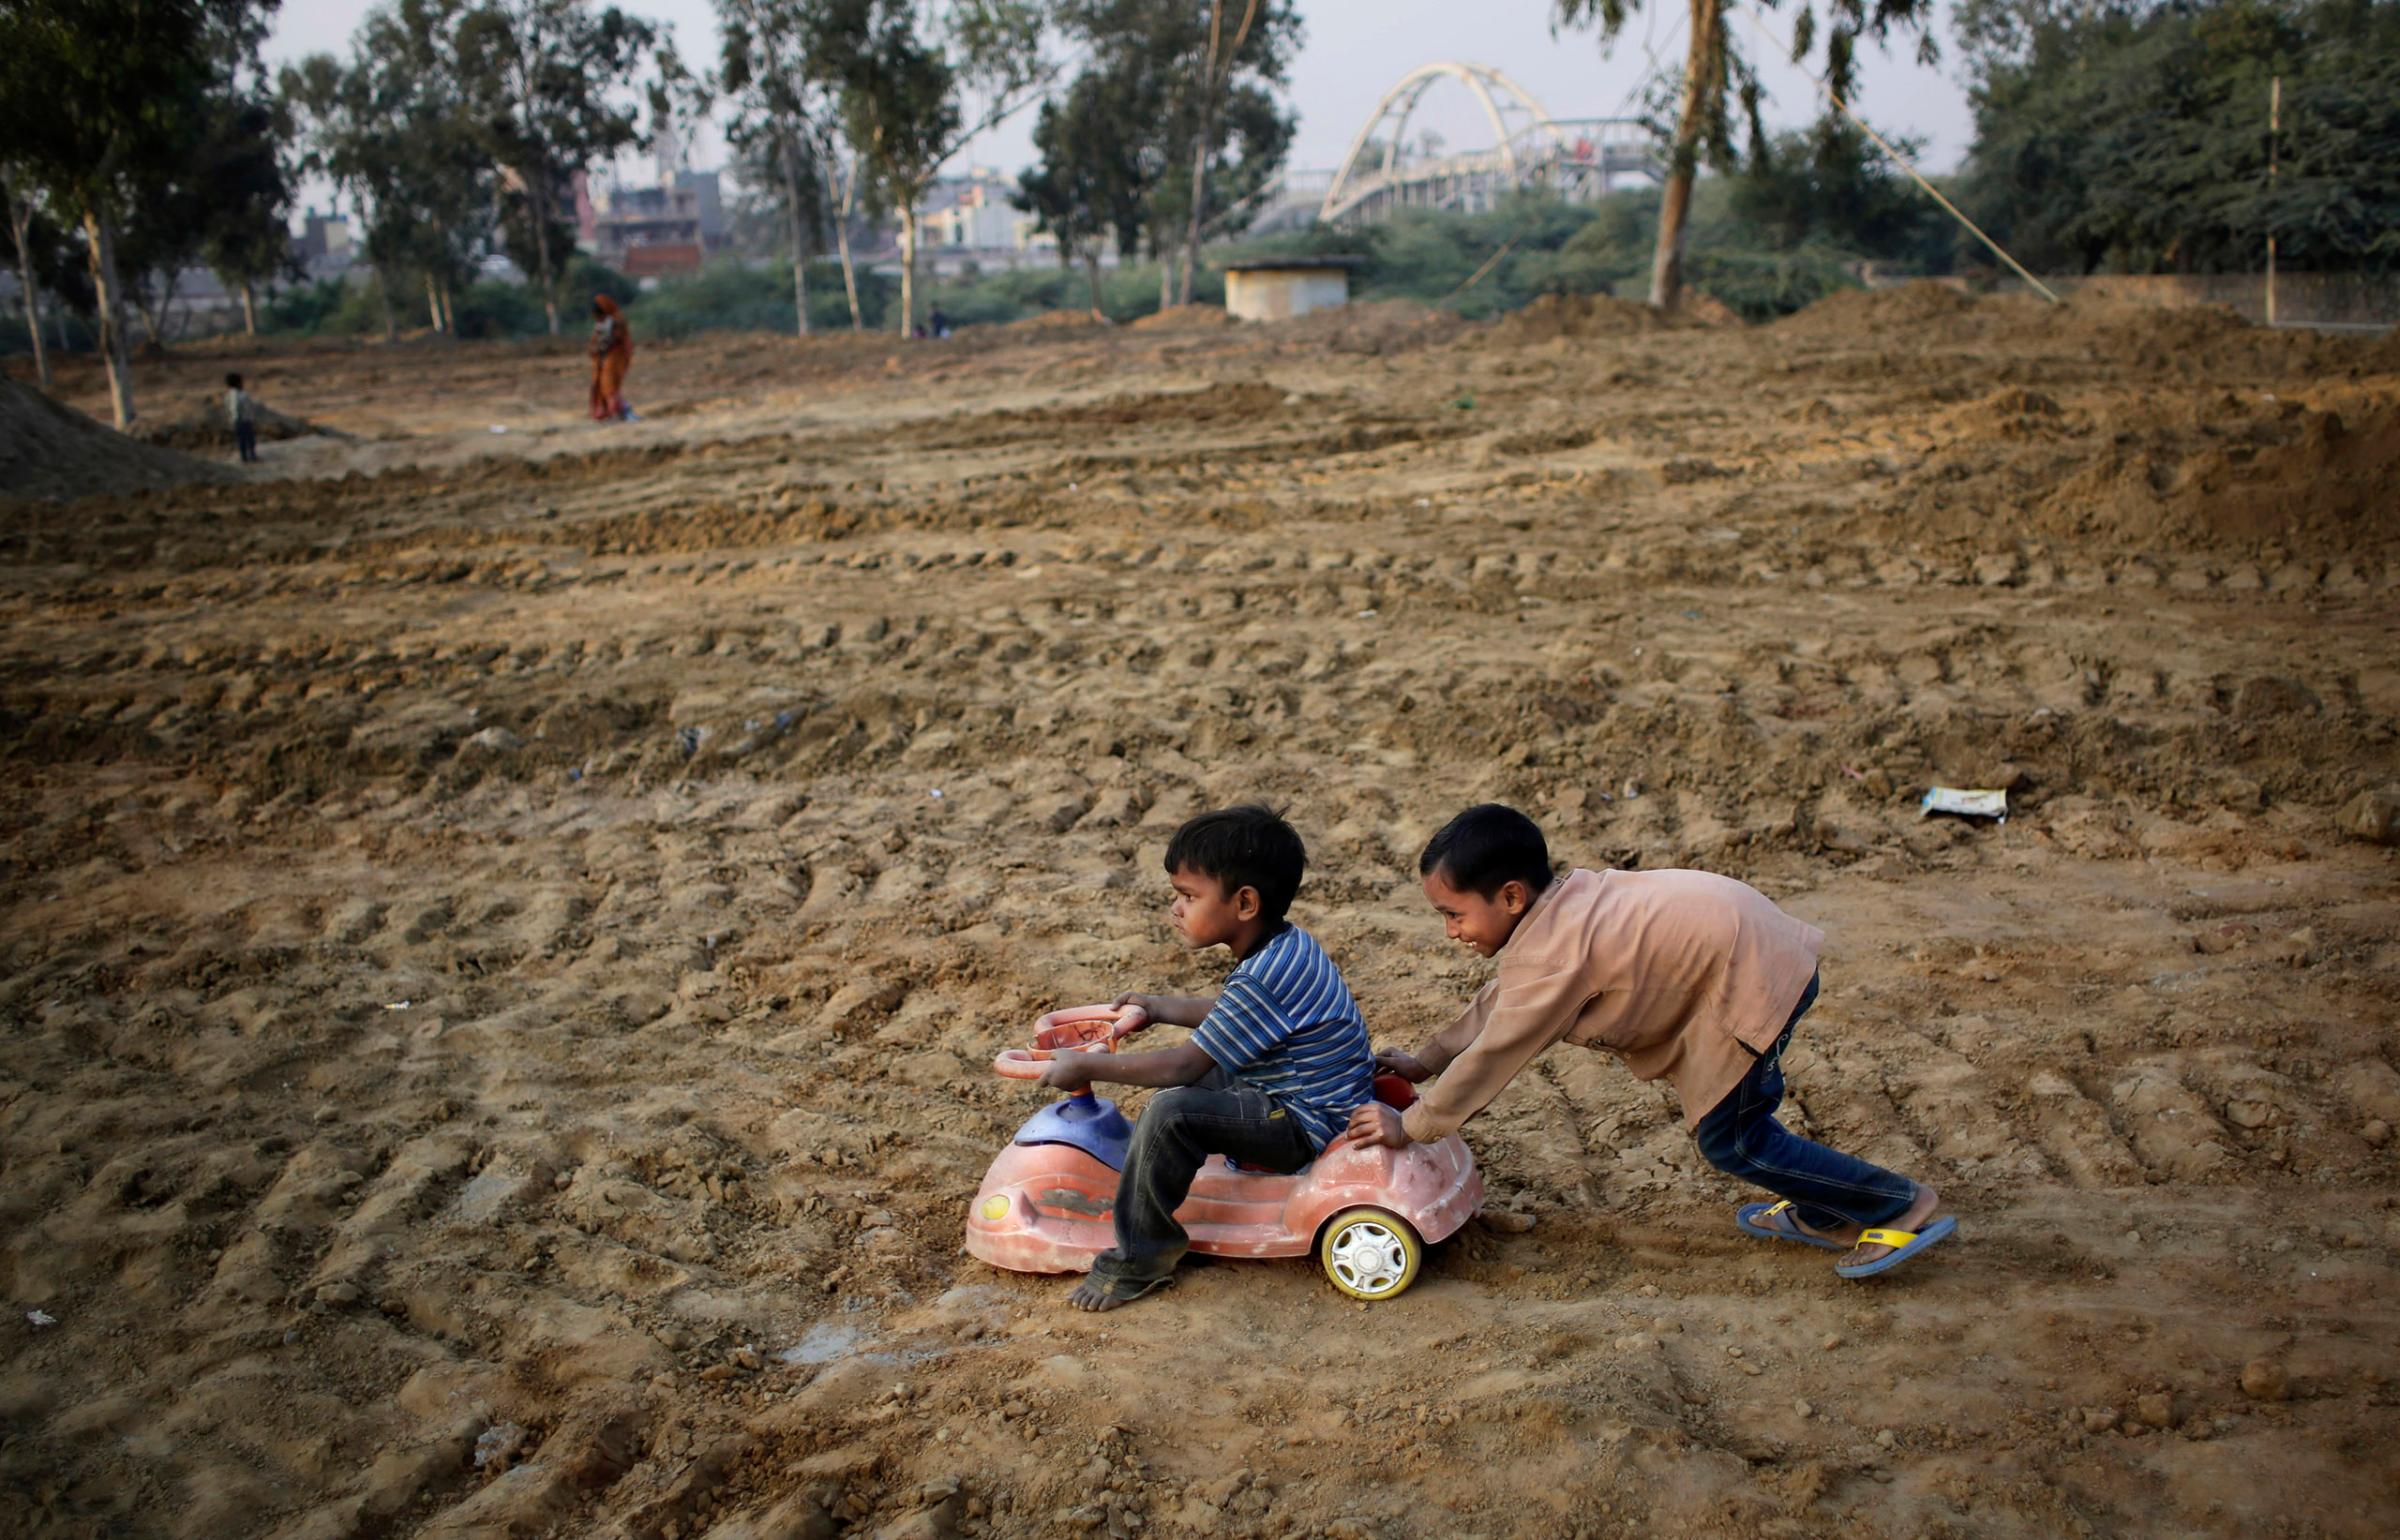 Indian boys play with a toy car salvaged from a nearby landfill in a field being prepared for a metro station near a slum in New Delhi, India on Nov. 13, 2014.